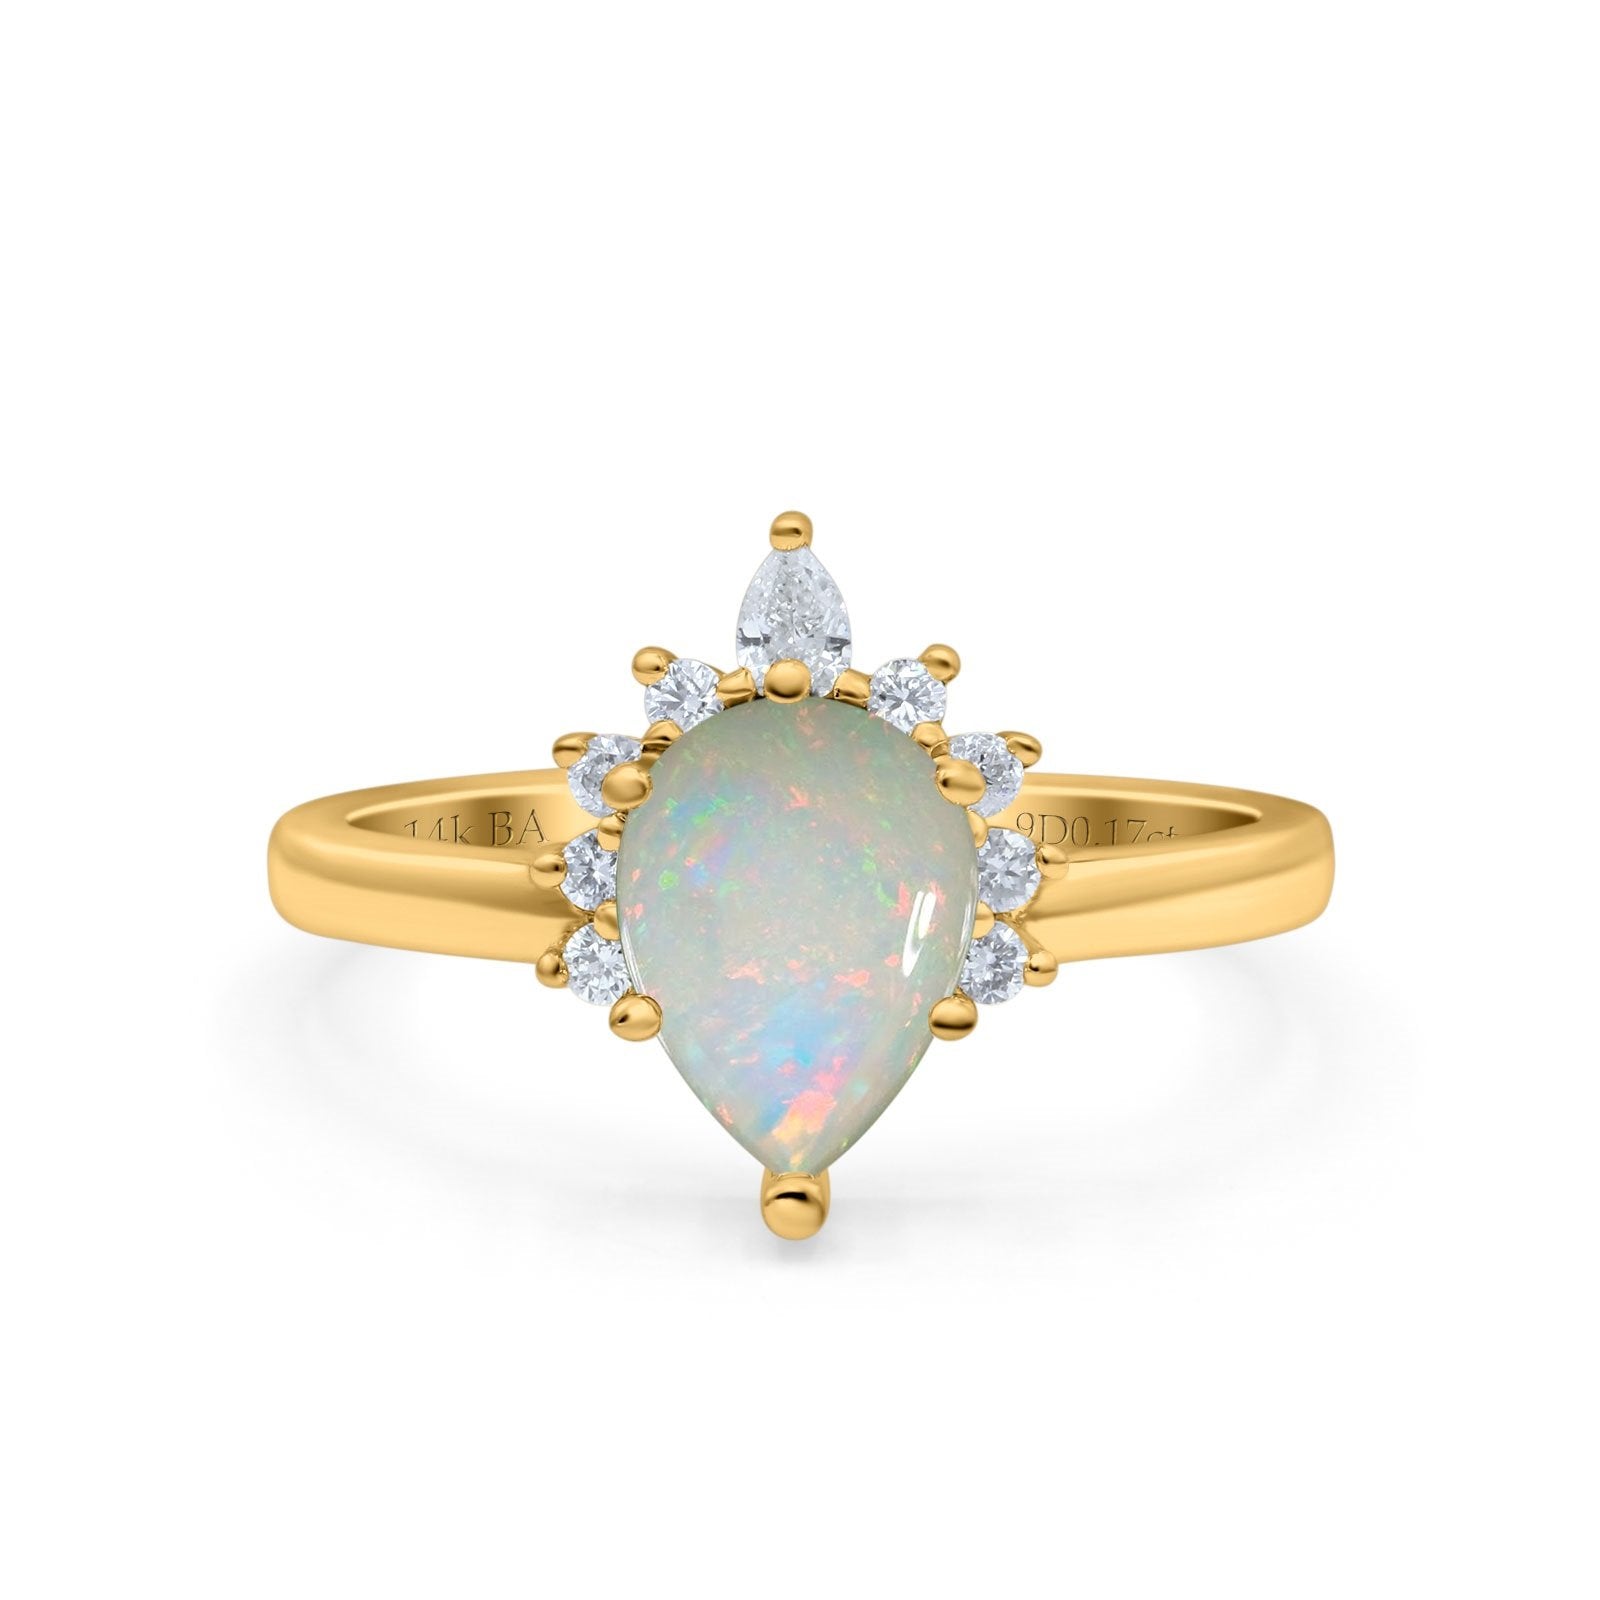 14K Yellow Gold 0.17ct Teardrop Art Deco Pear 9mmx6mm G SI Natural White Opal Diamond Engagement Wedding Ring Size 6.5